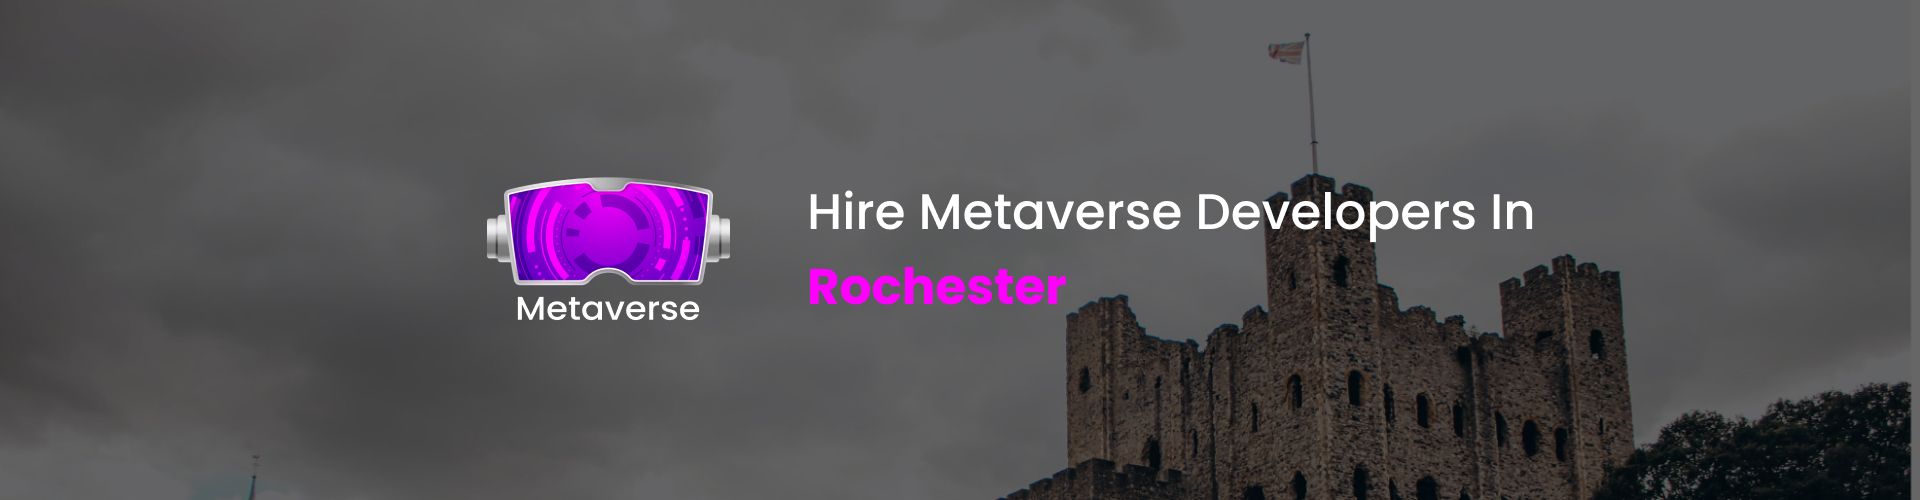 hire metaverse developers in rochester